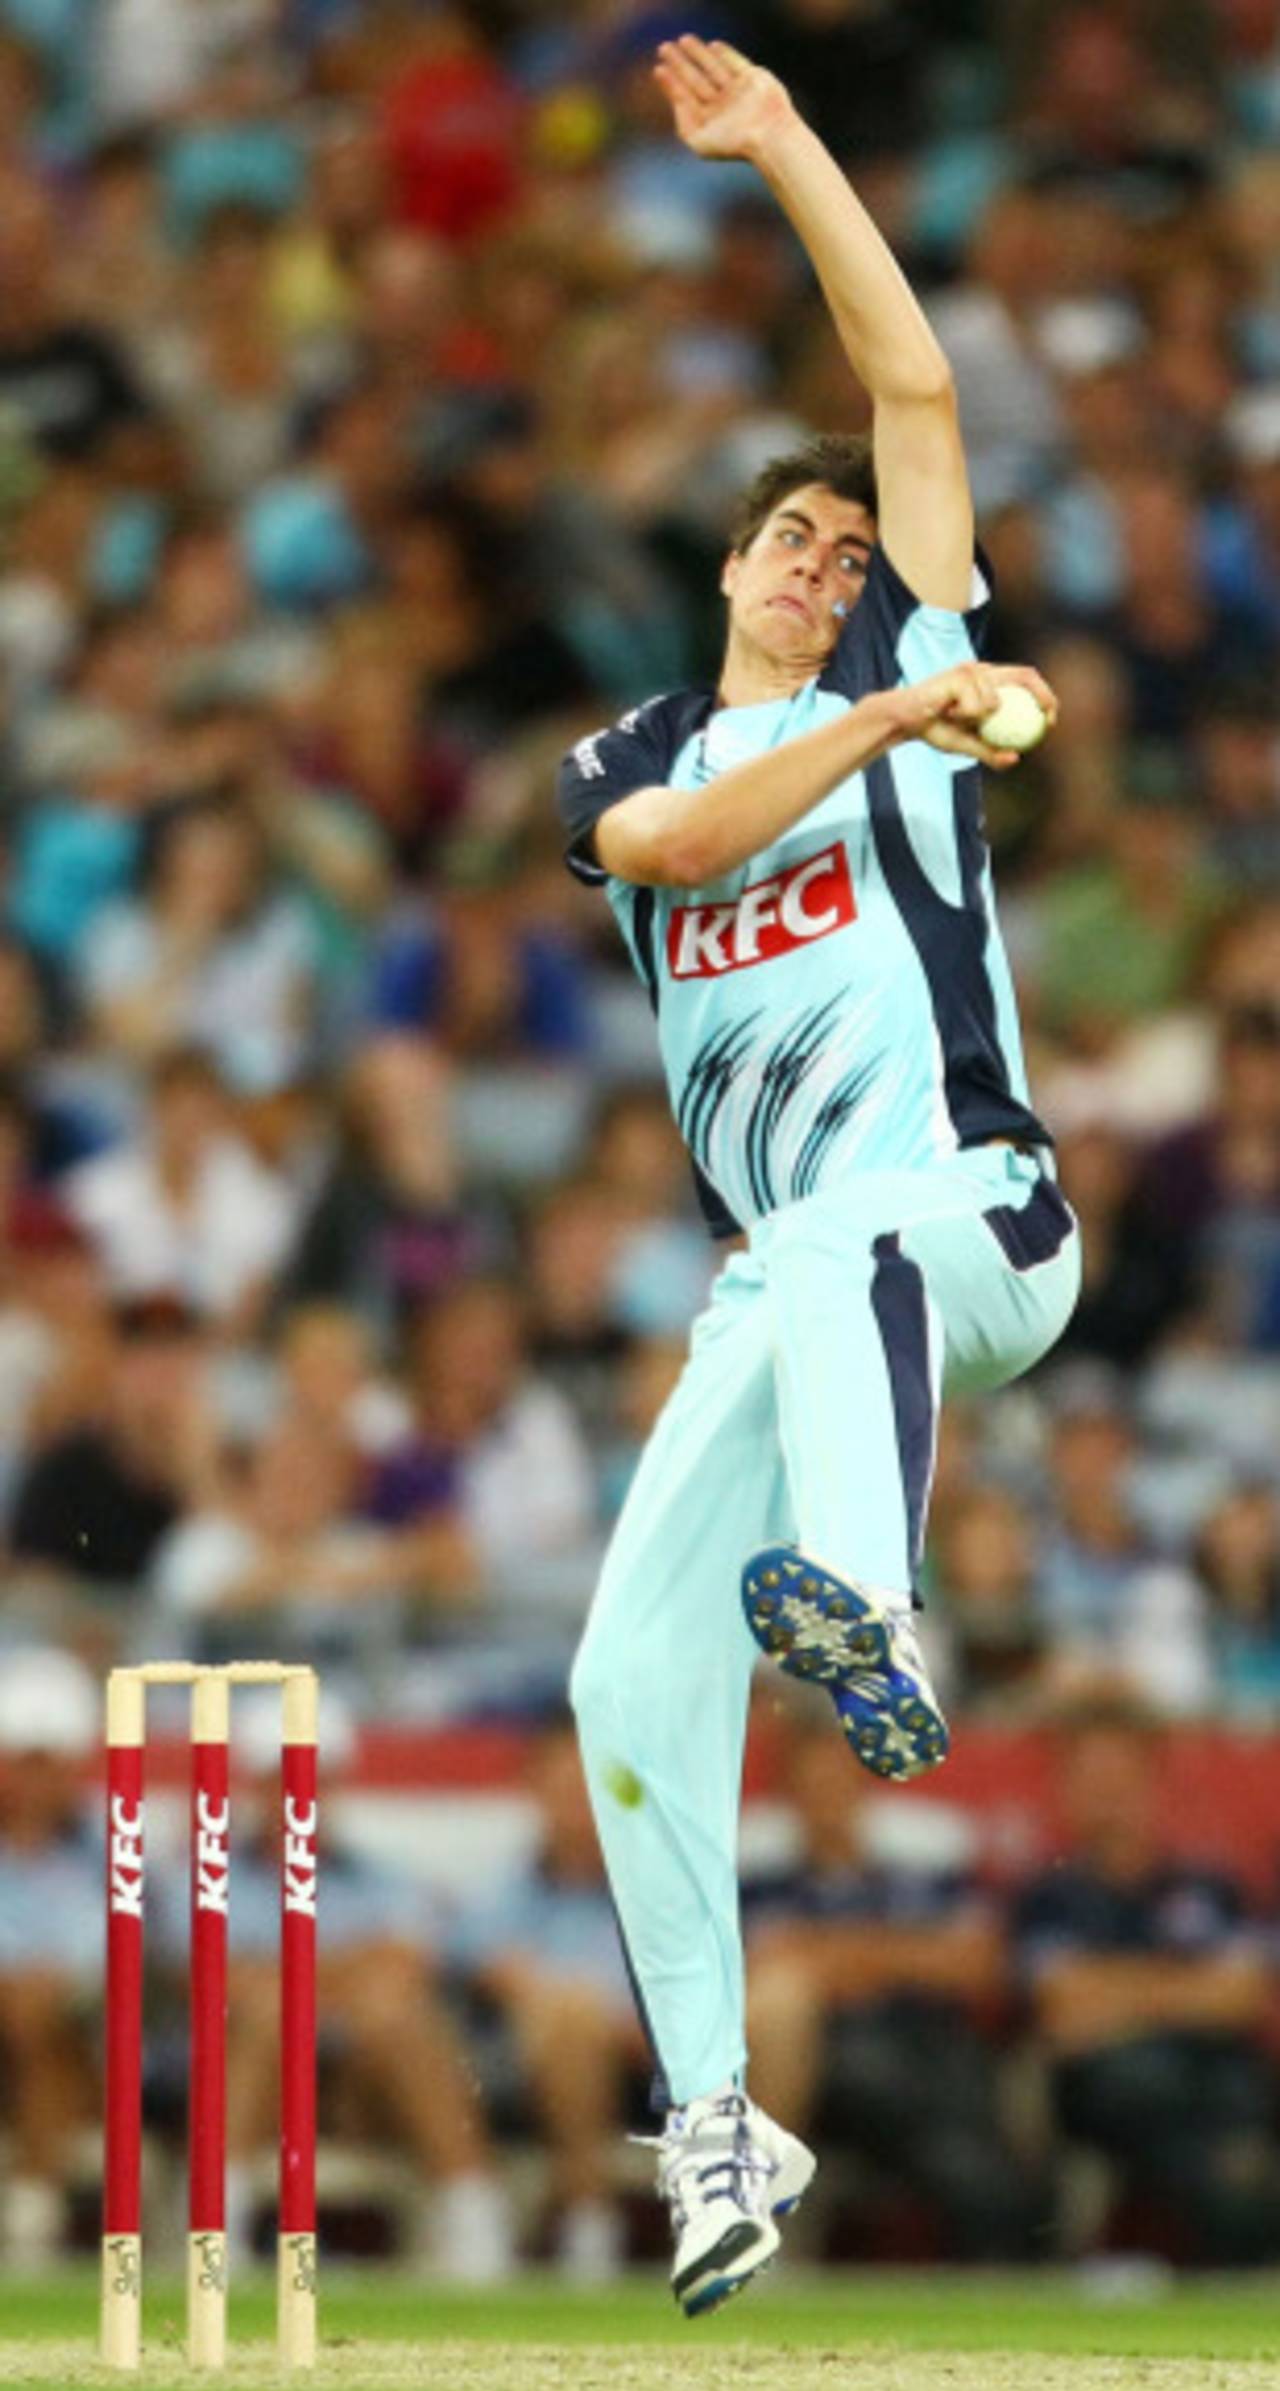 Pat Cummins in his delivery stride, New South Wales v Queensland, Big Bash, Sydney, January 29, 2011